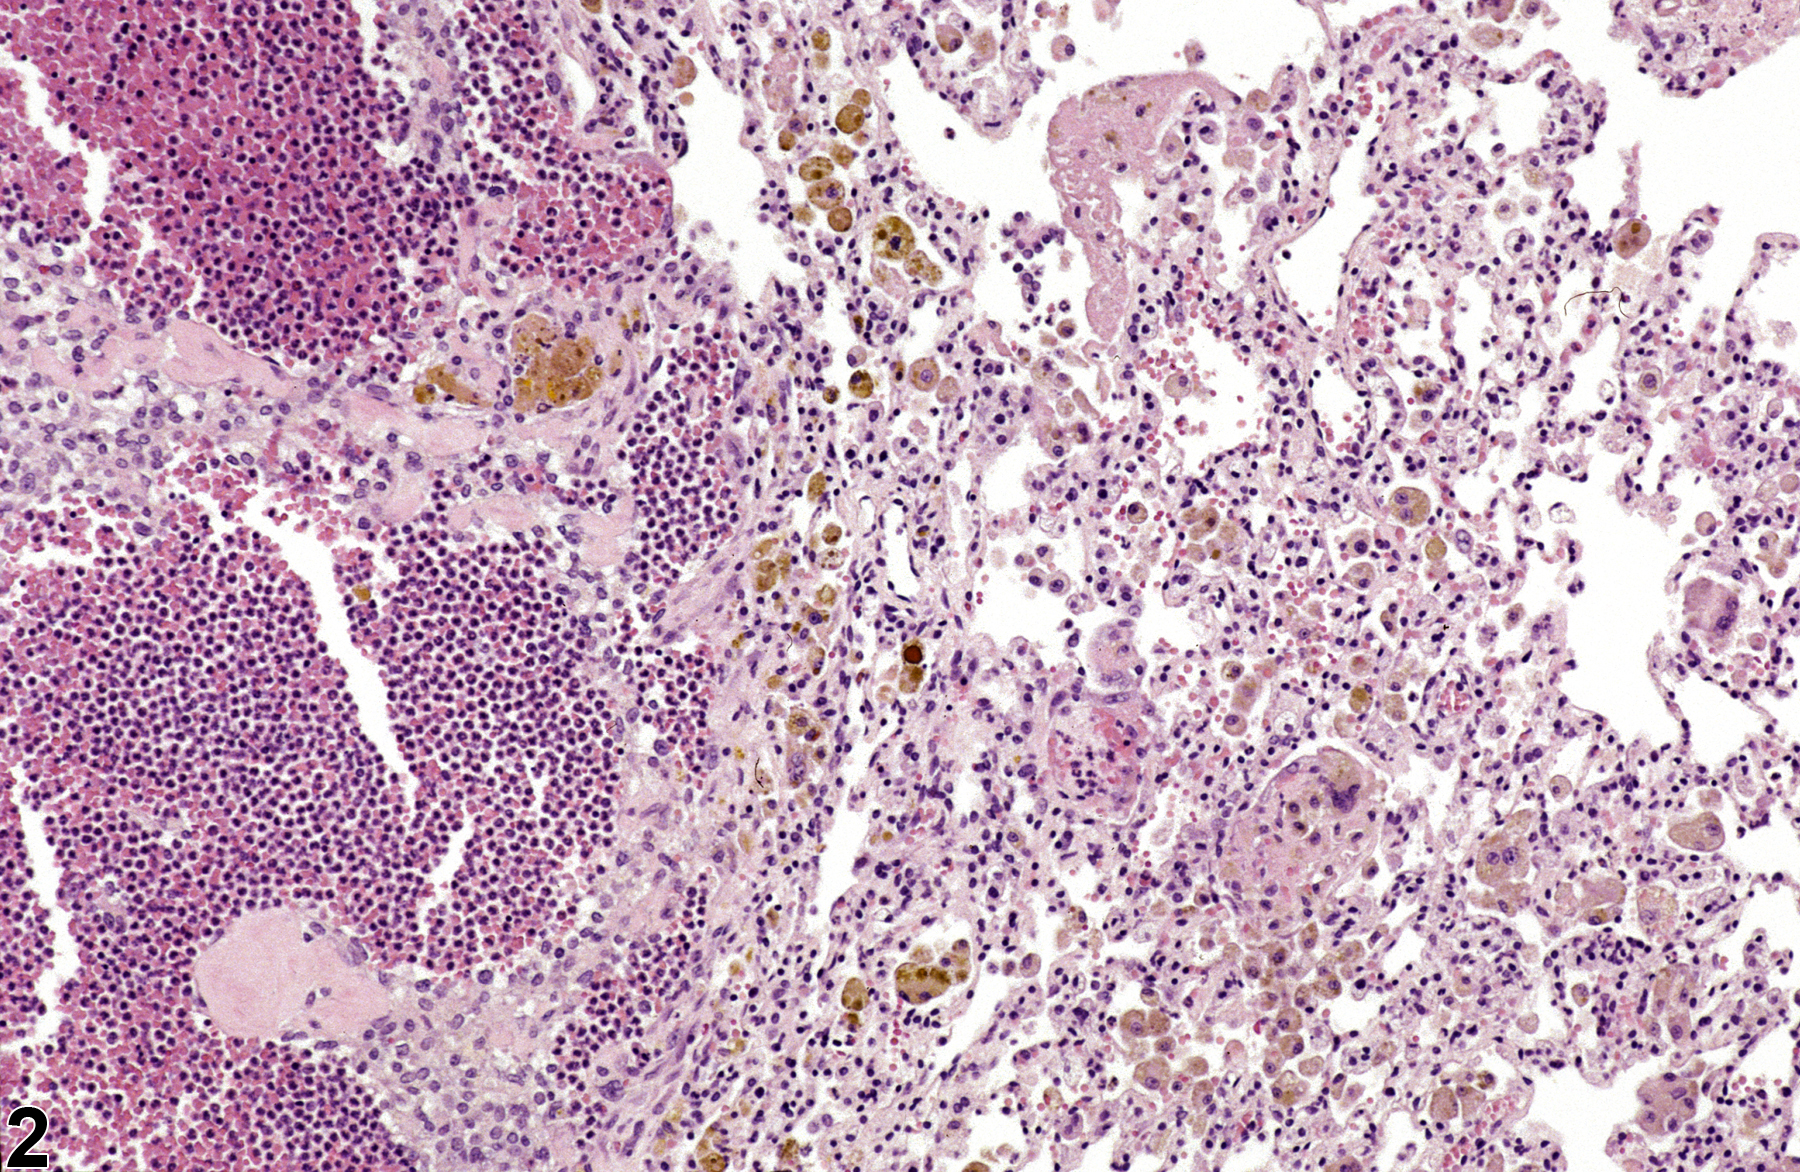 Image of alveolar pigment in the lung from a male F344/N rat in a chronic study